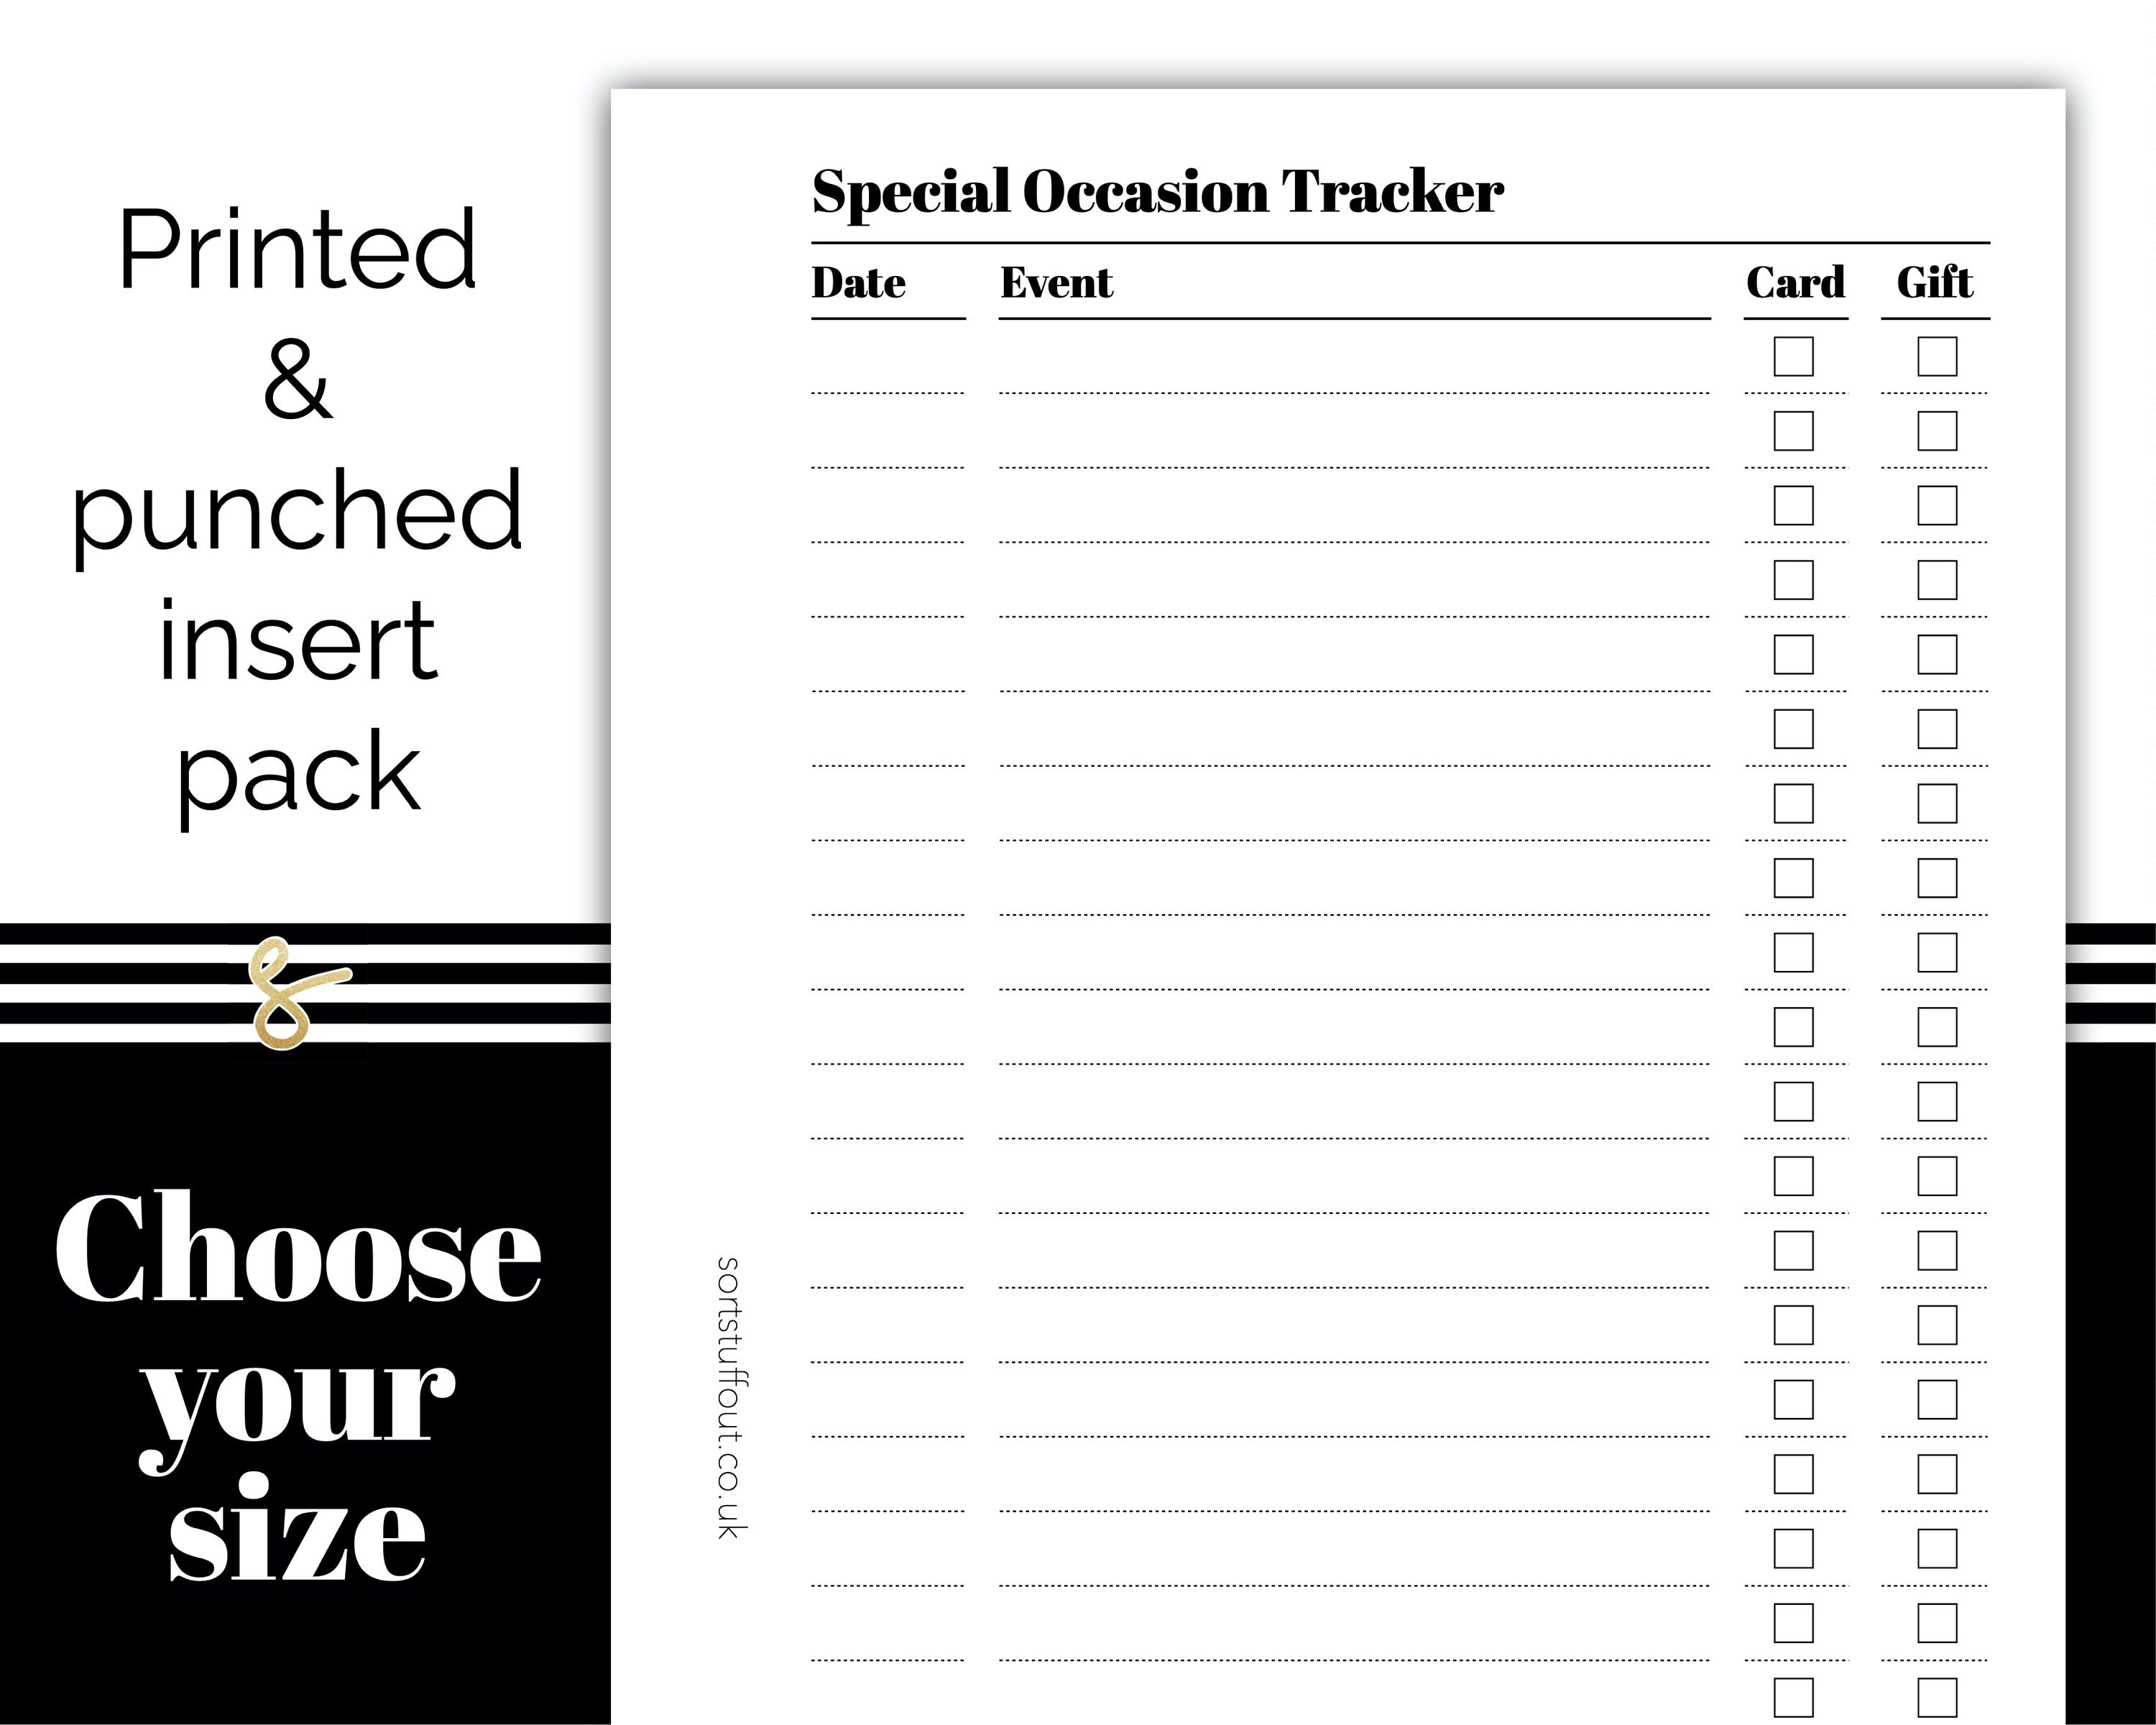 Special Occasion Tracker - Printed Planner Inserts